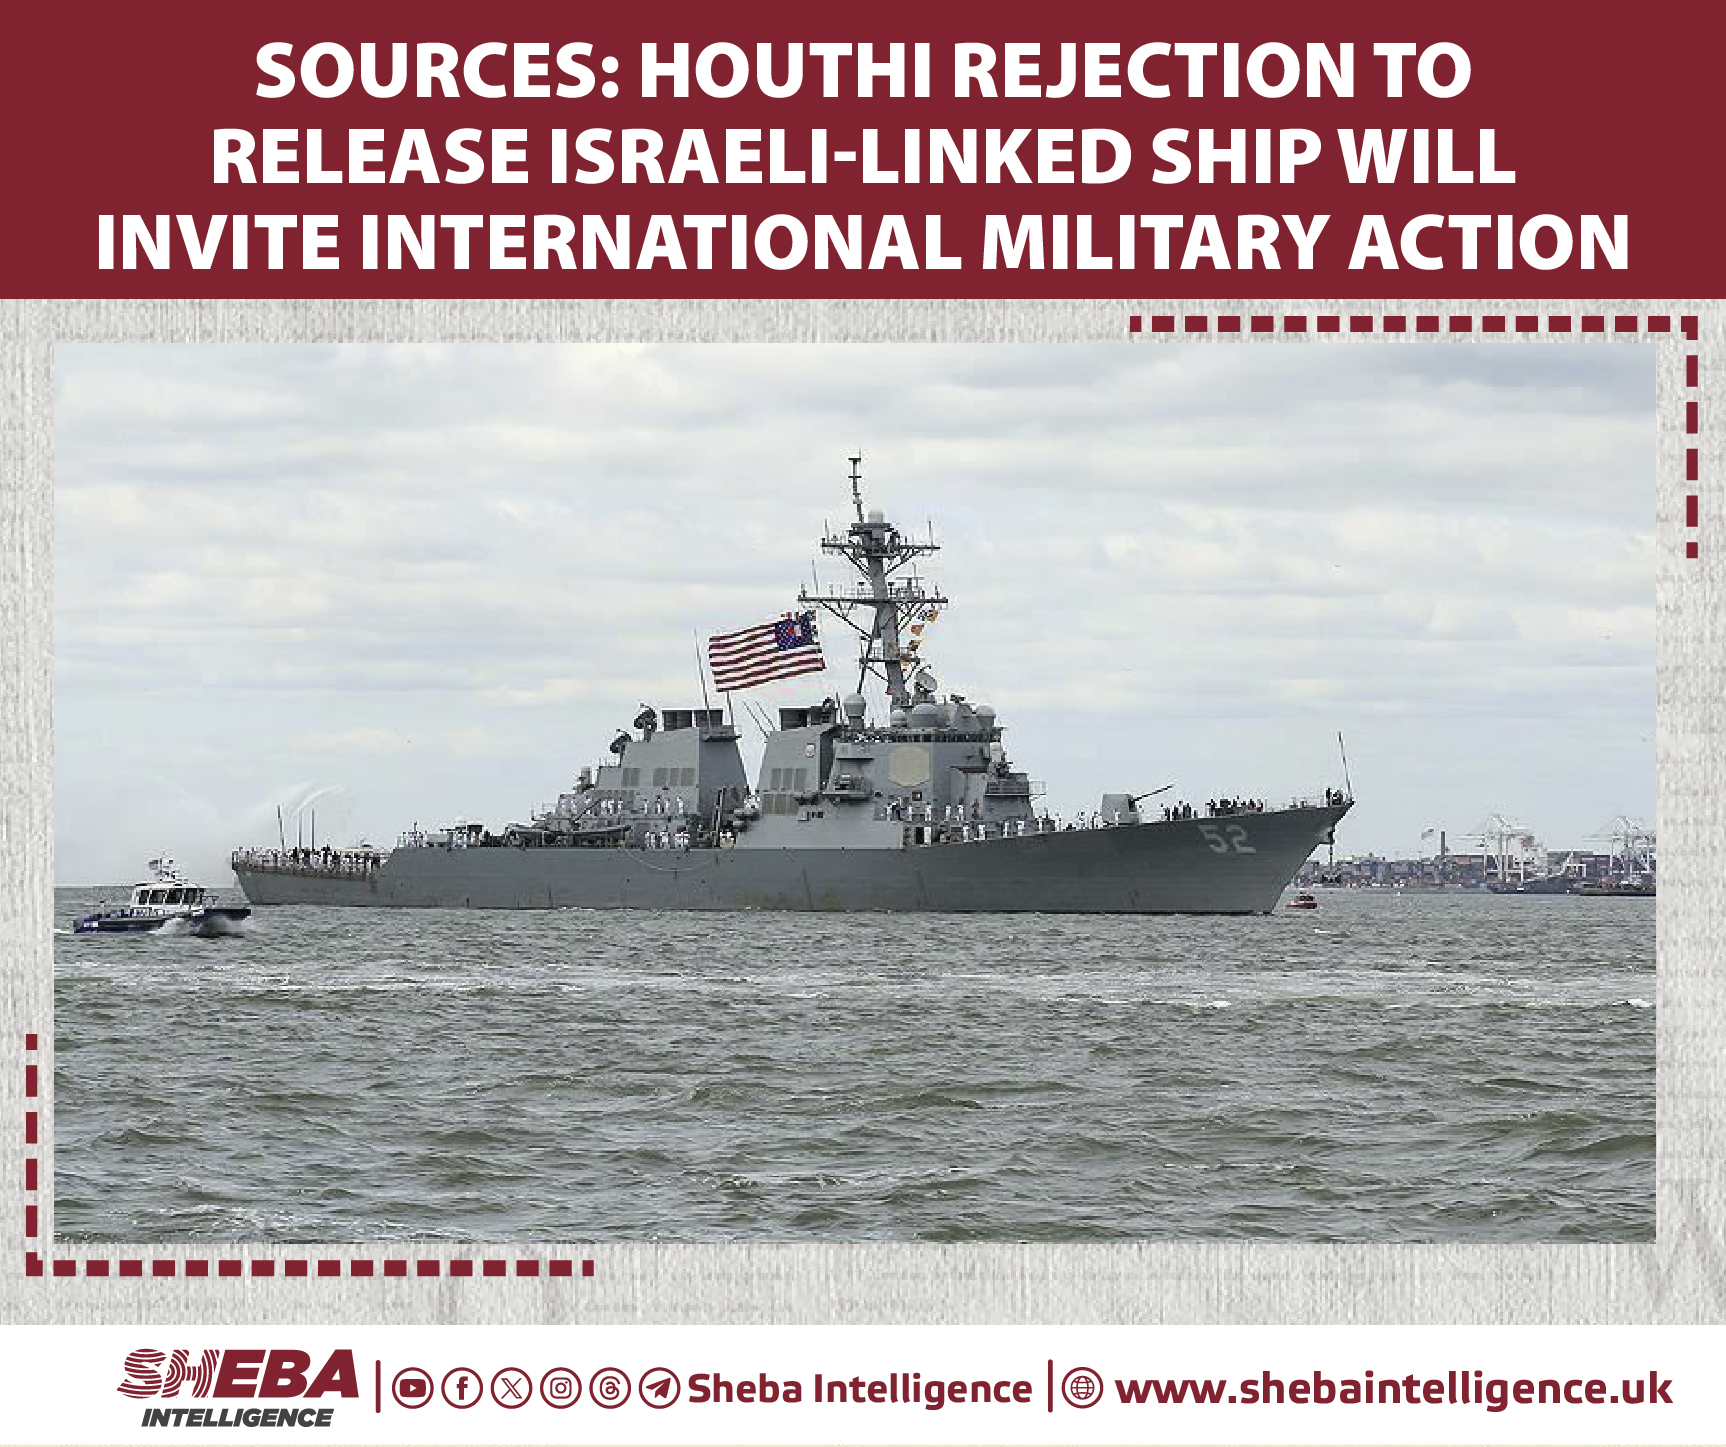 Sources: Houthi Rejection to Release Israeli-Linked Ship Will Invite International Military Action